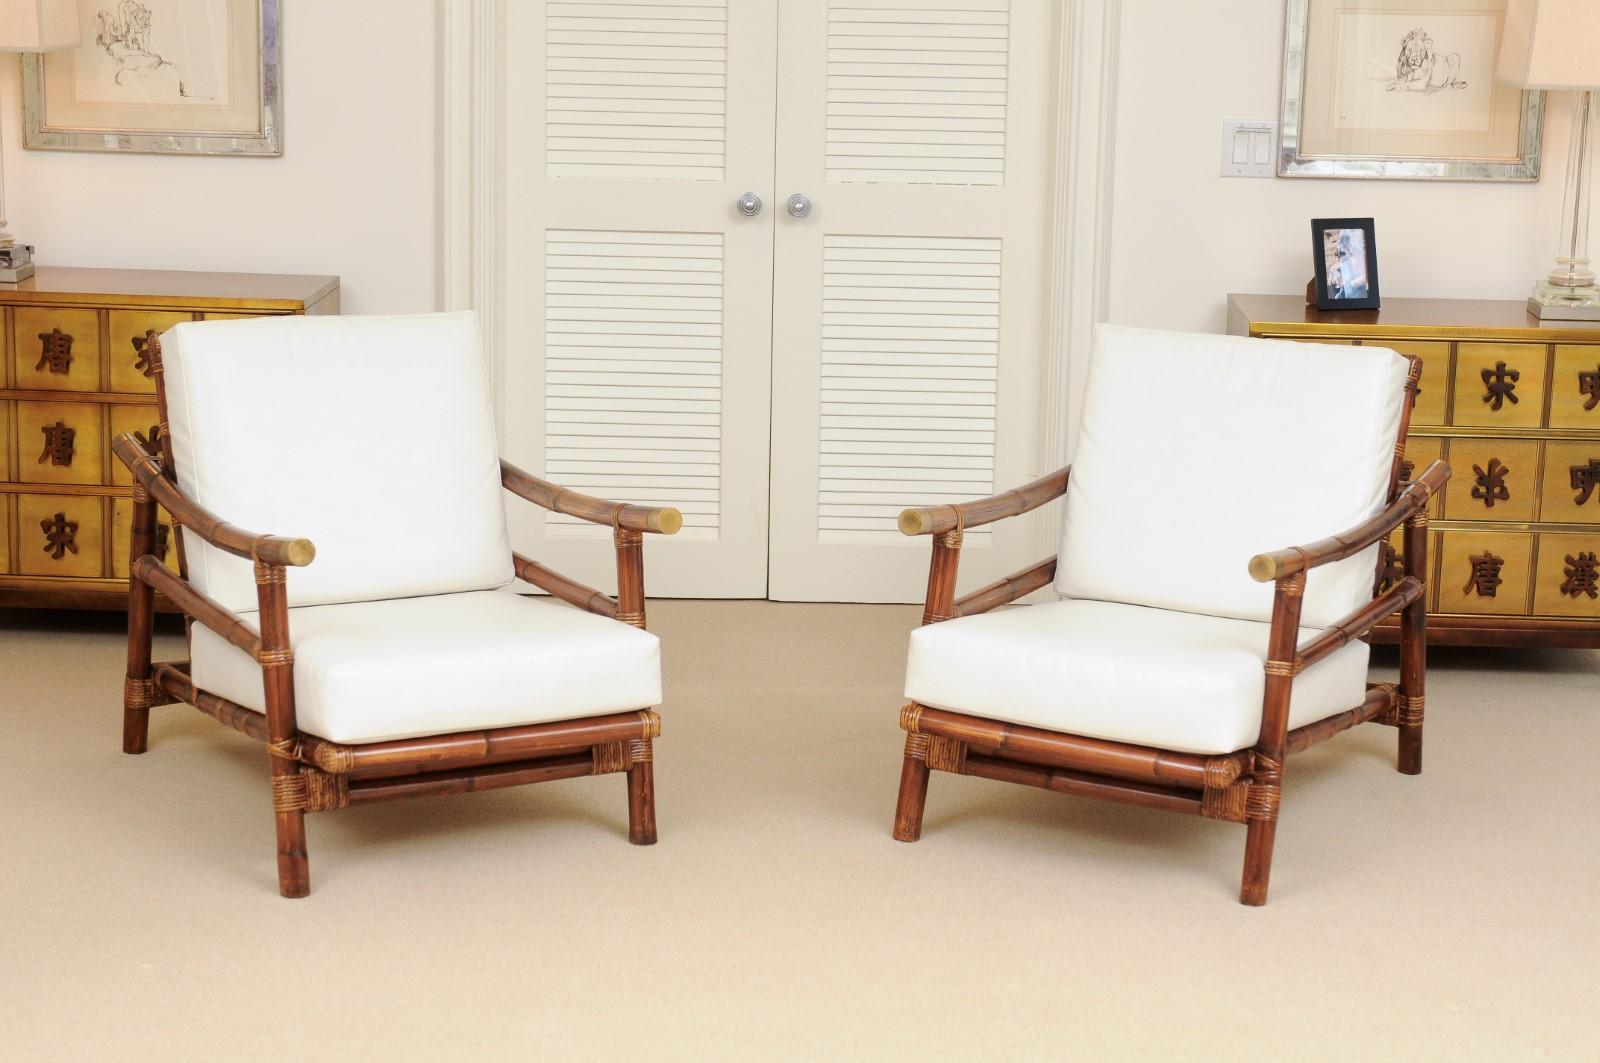 Stellar Restored Pair of Rattan Campaign Loungers, circa 1960 For Sale 2